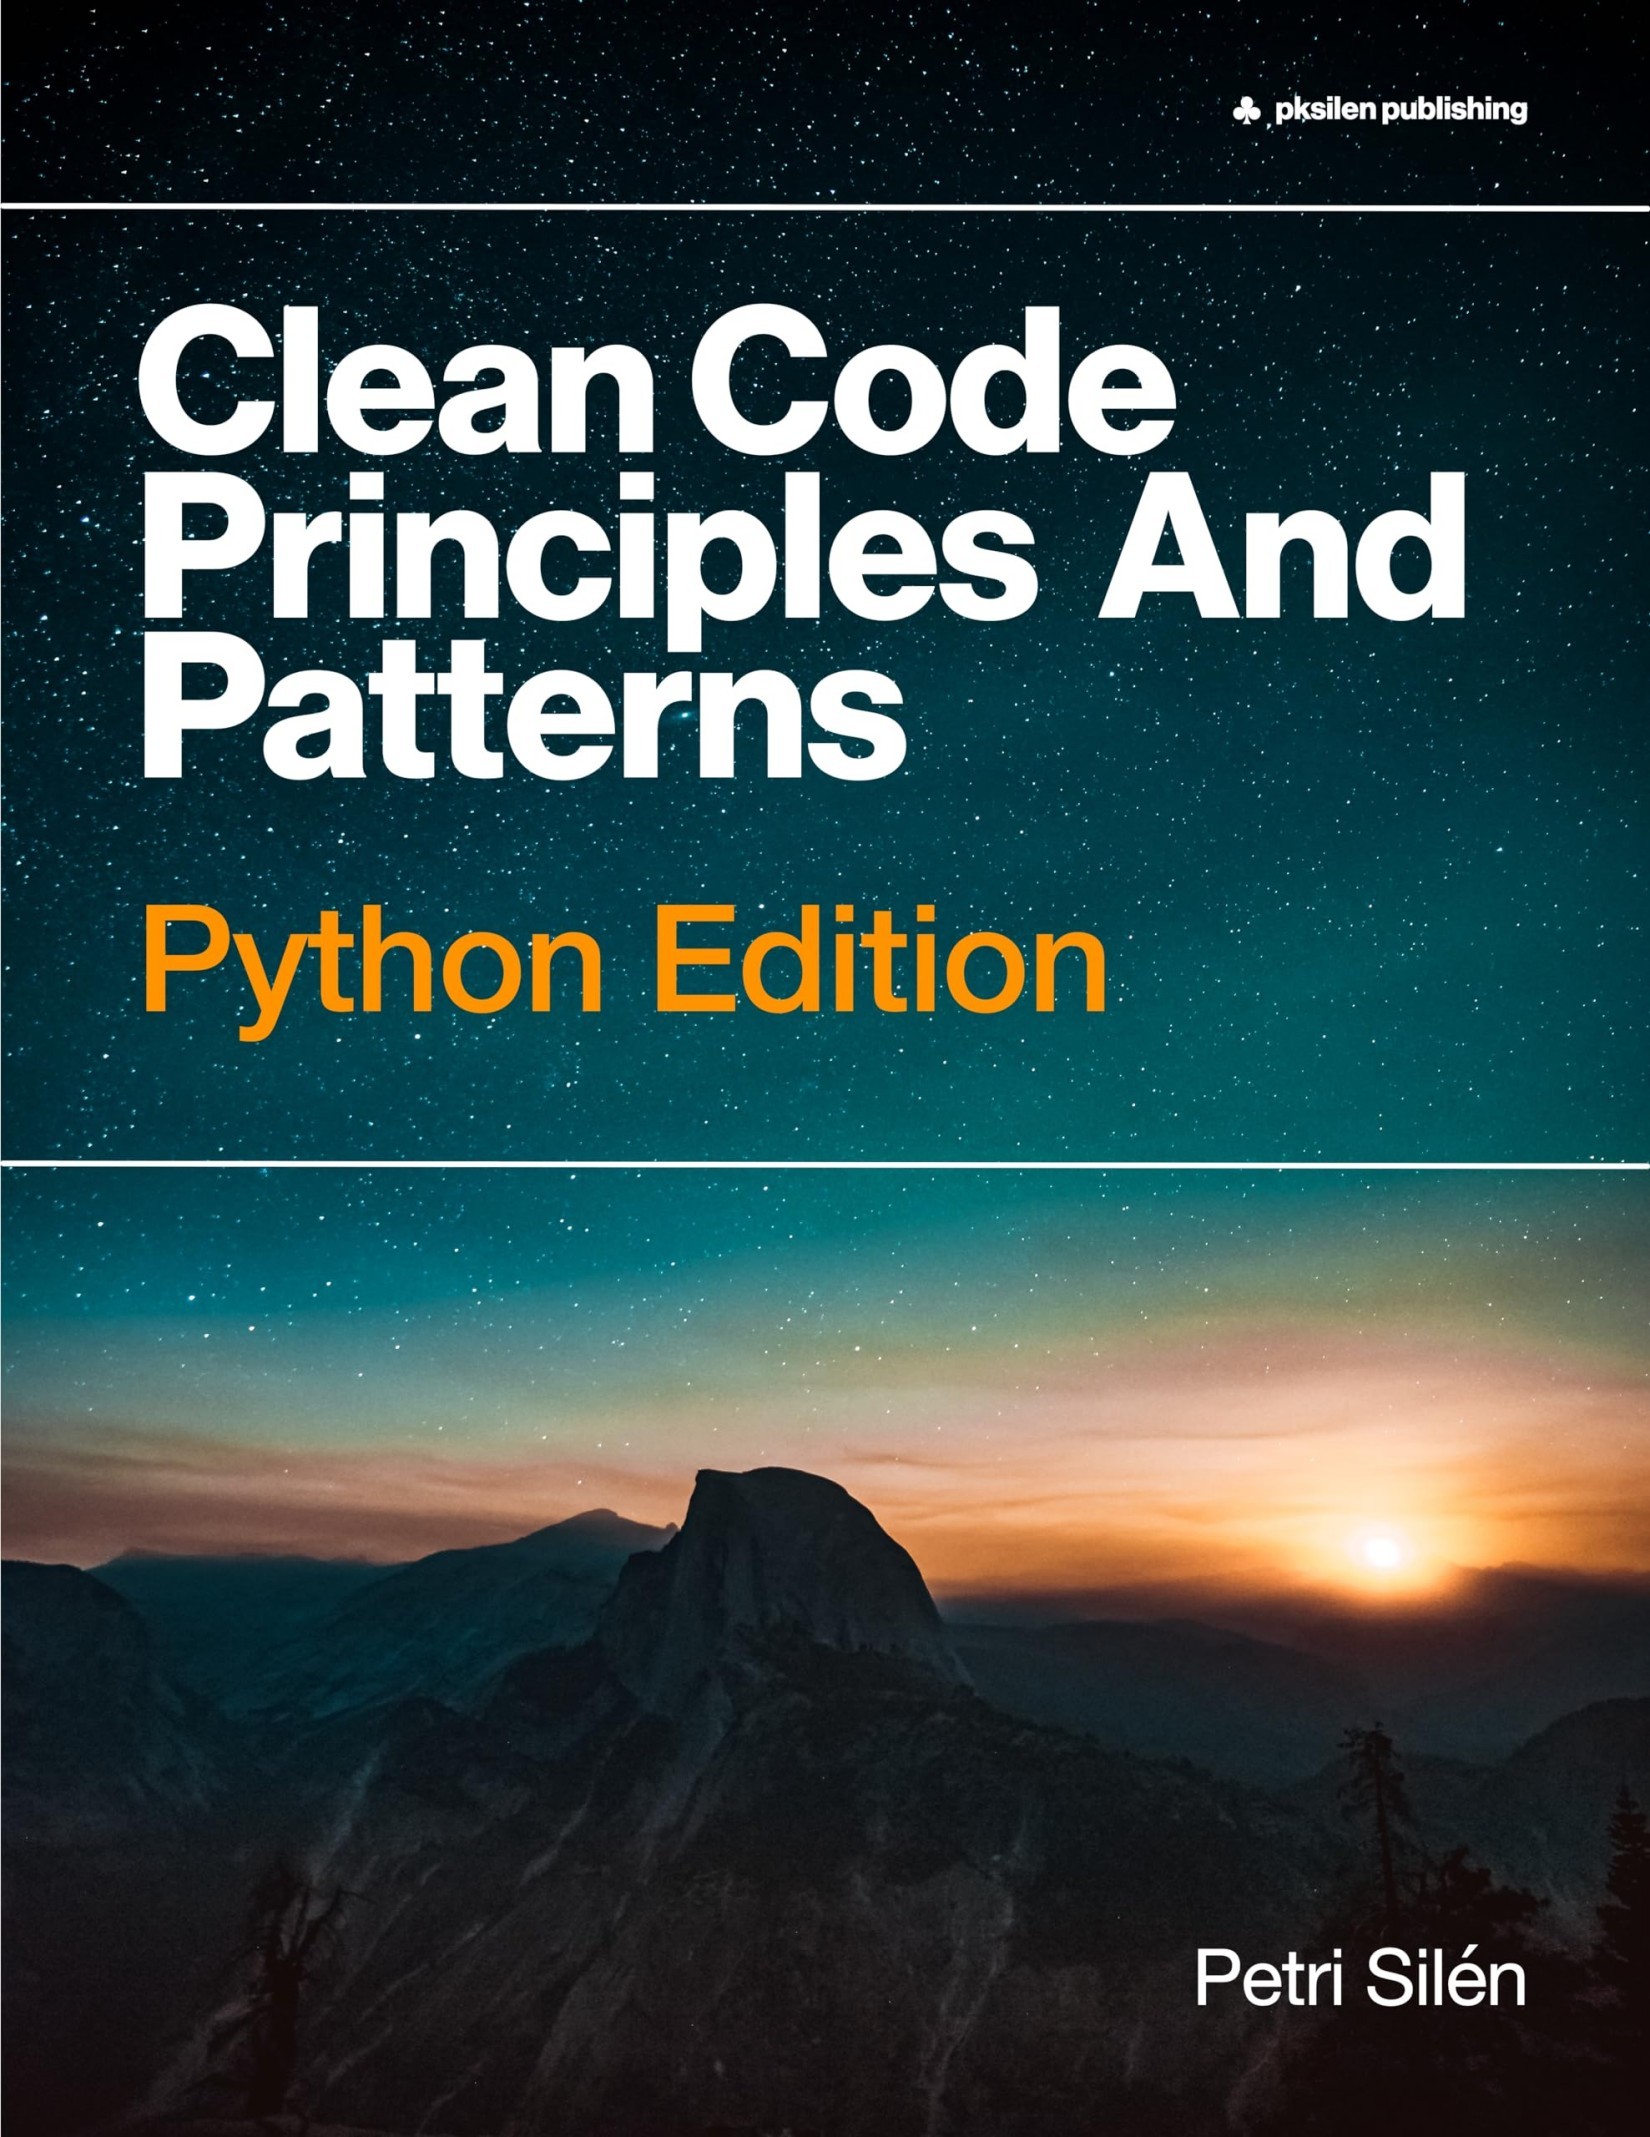 Clean Code Principles and Patterns: Python Edition